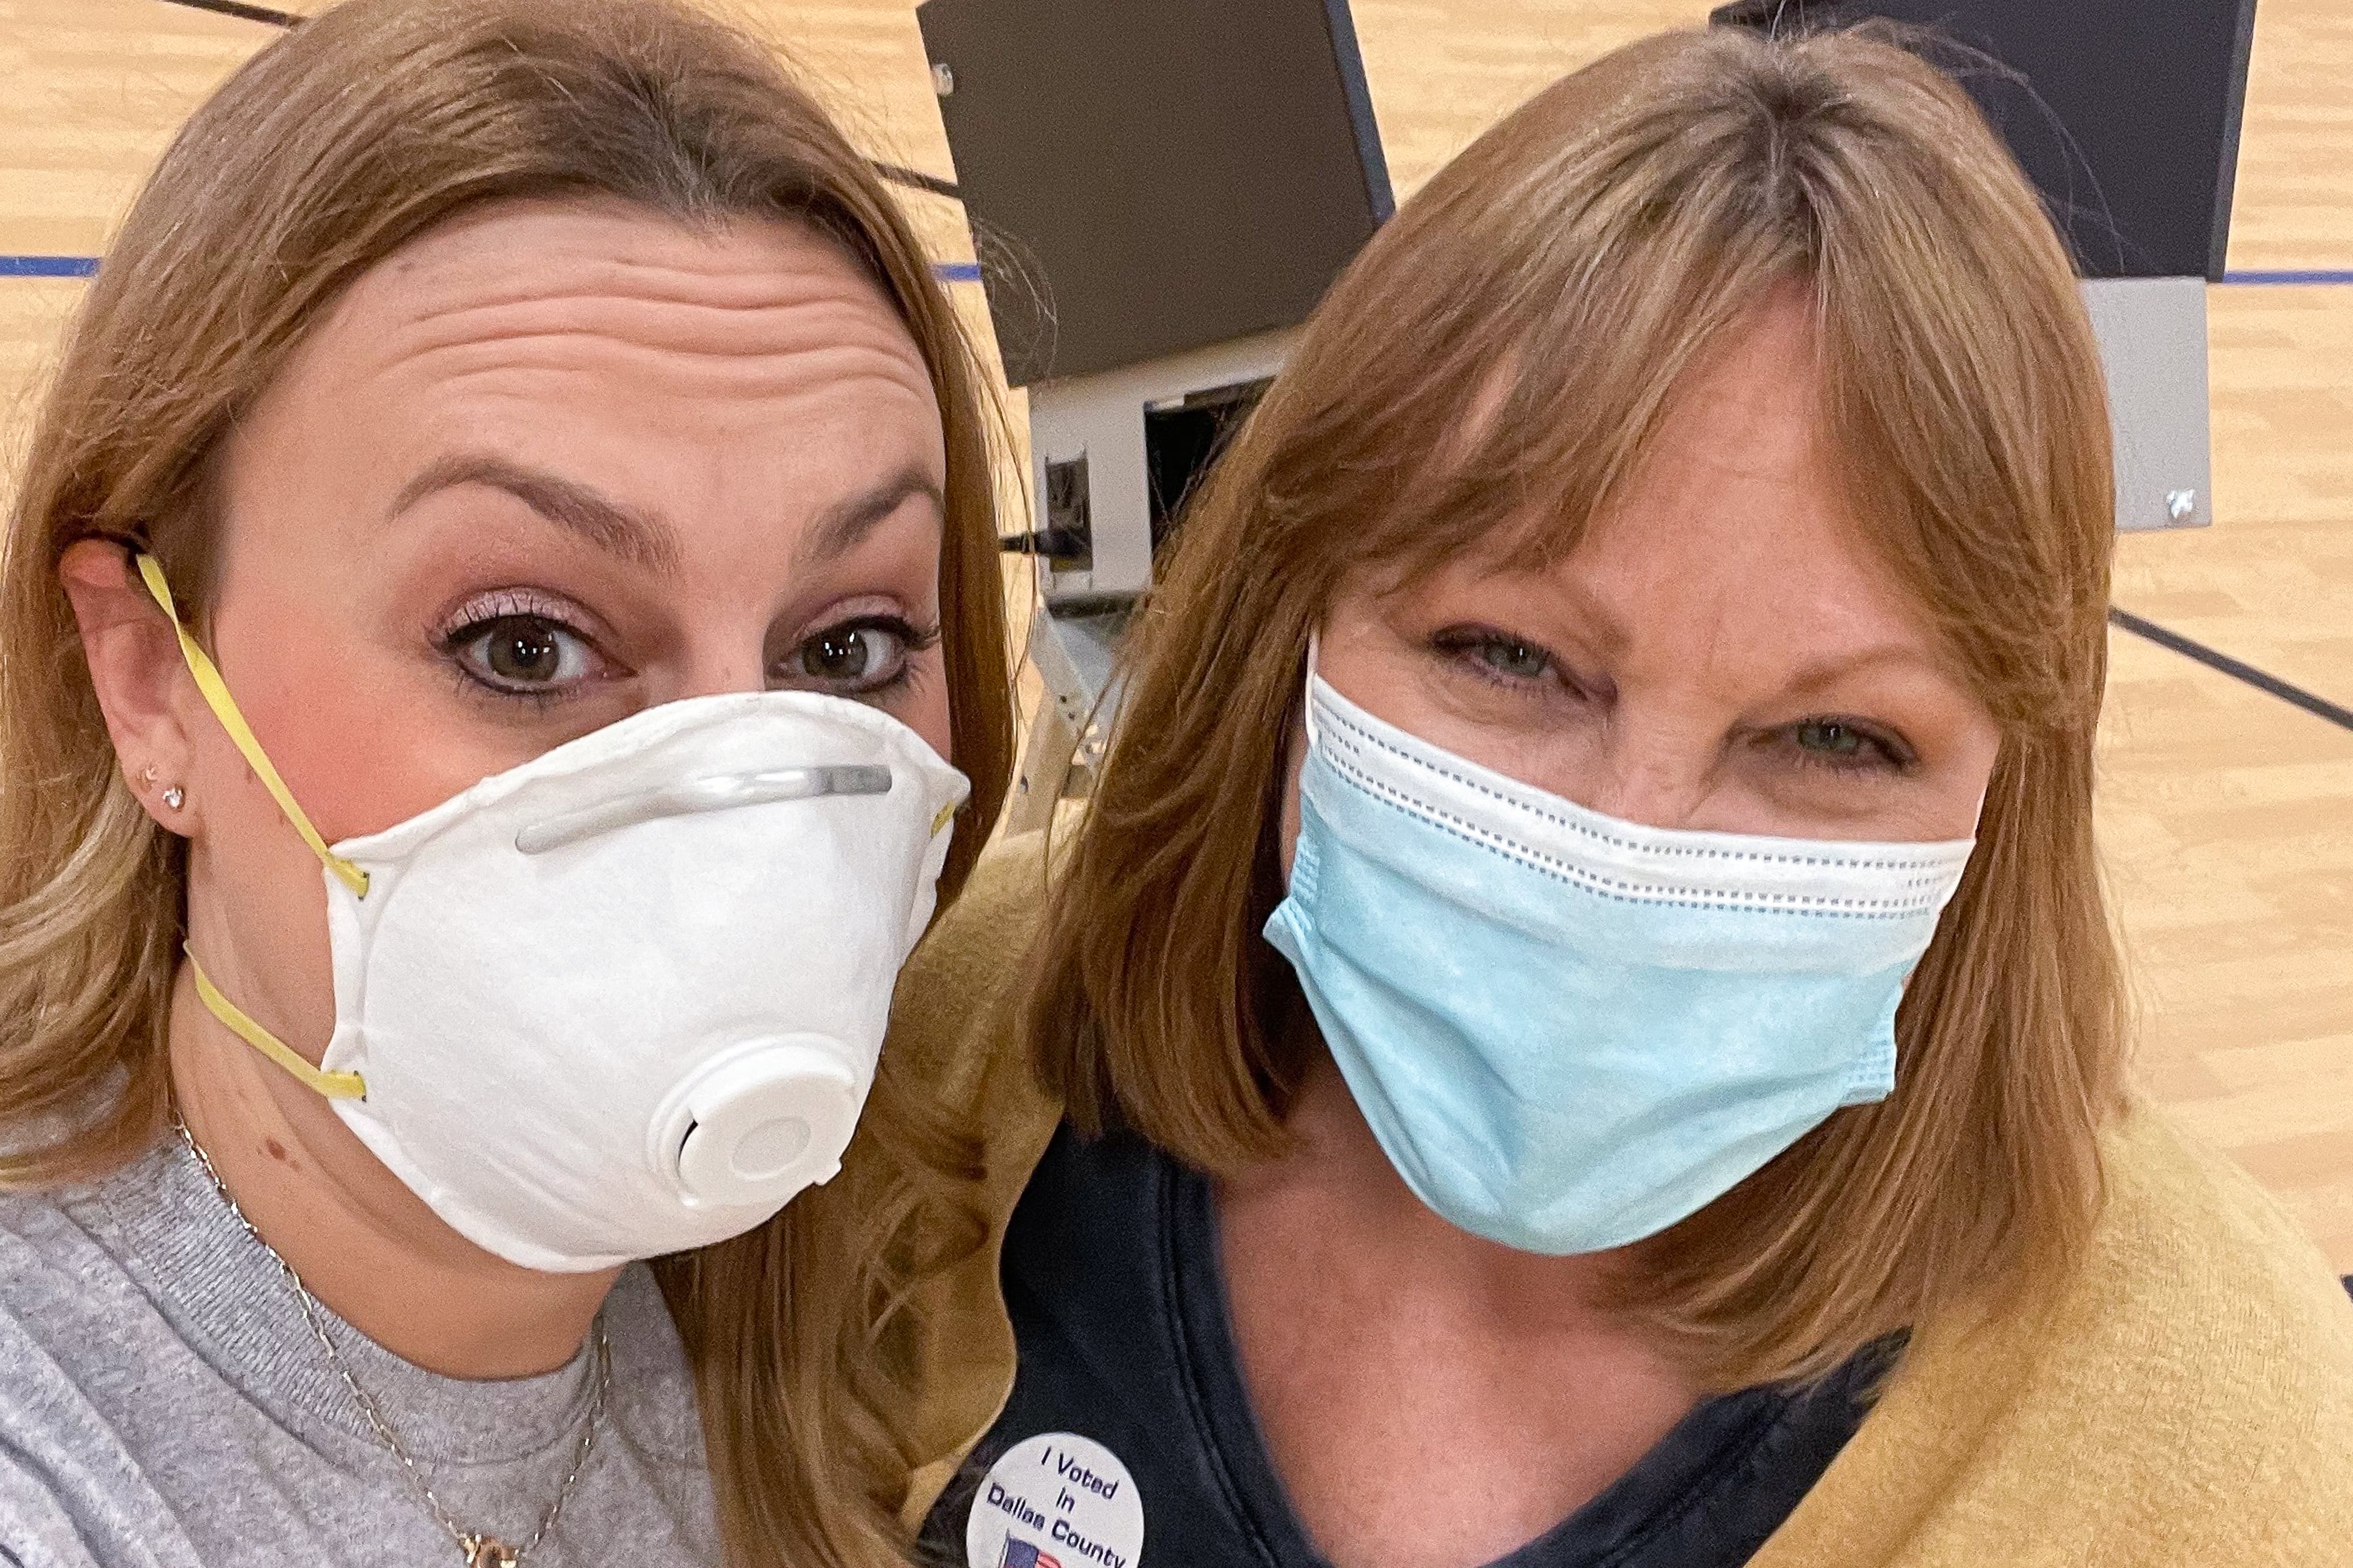 Two women wearing face masks pose inside a gymnasium with voting booths behind them.